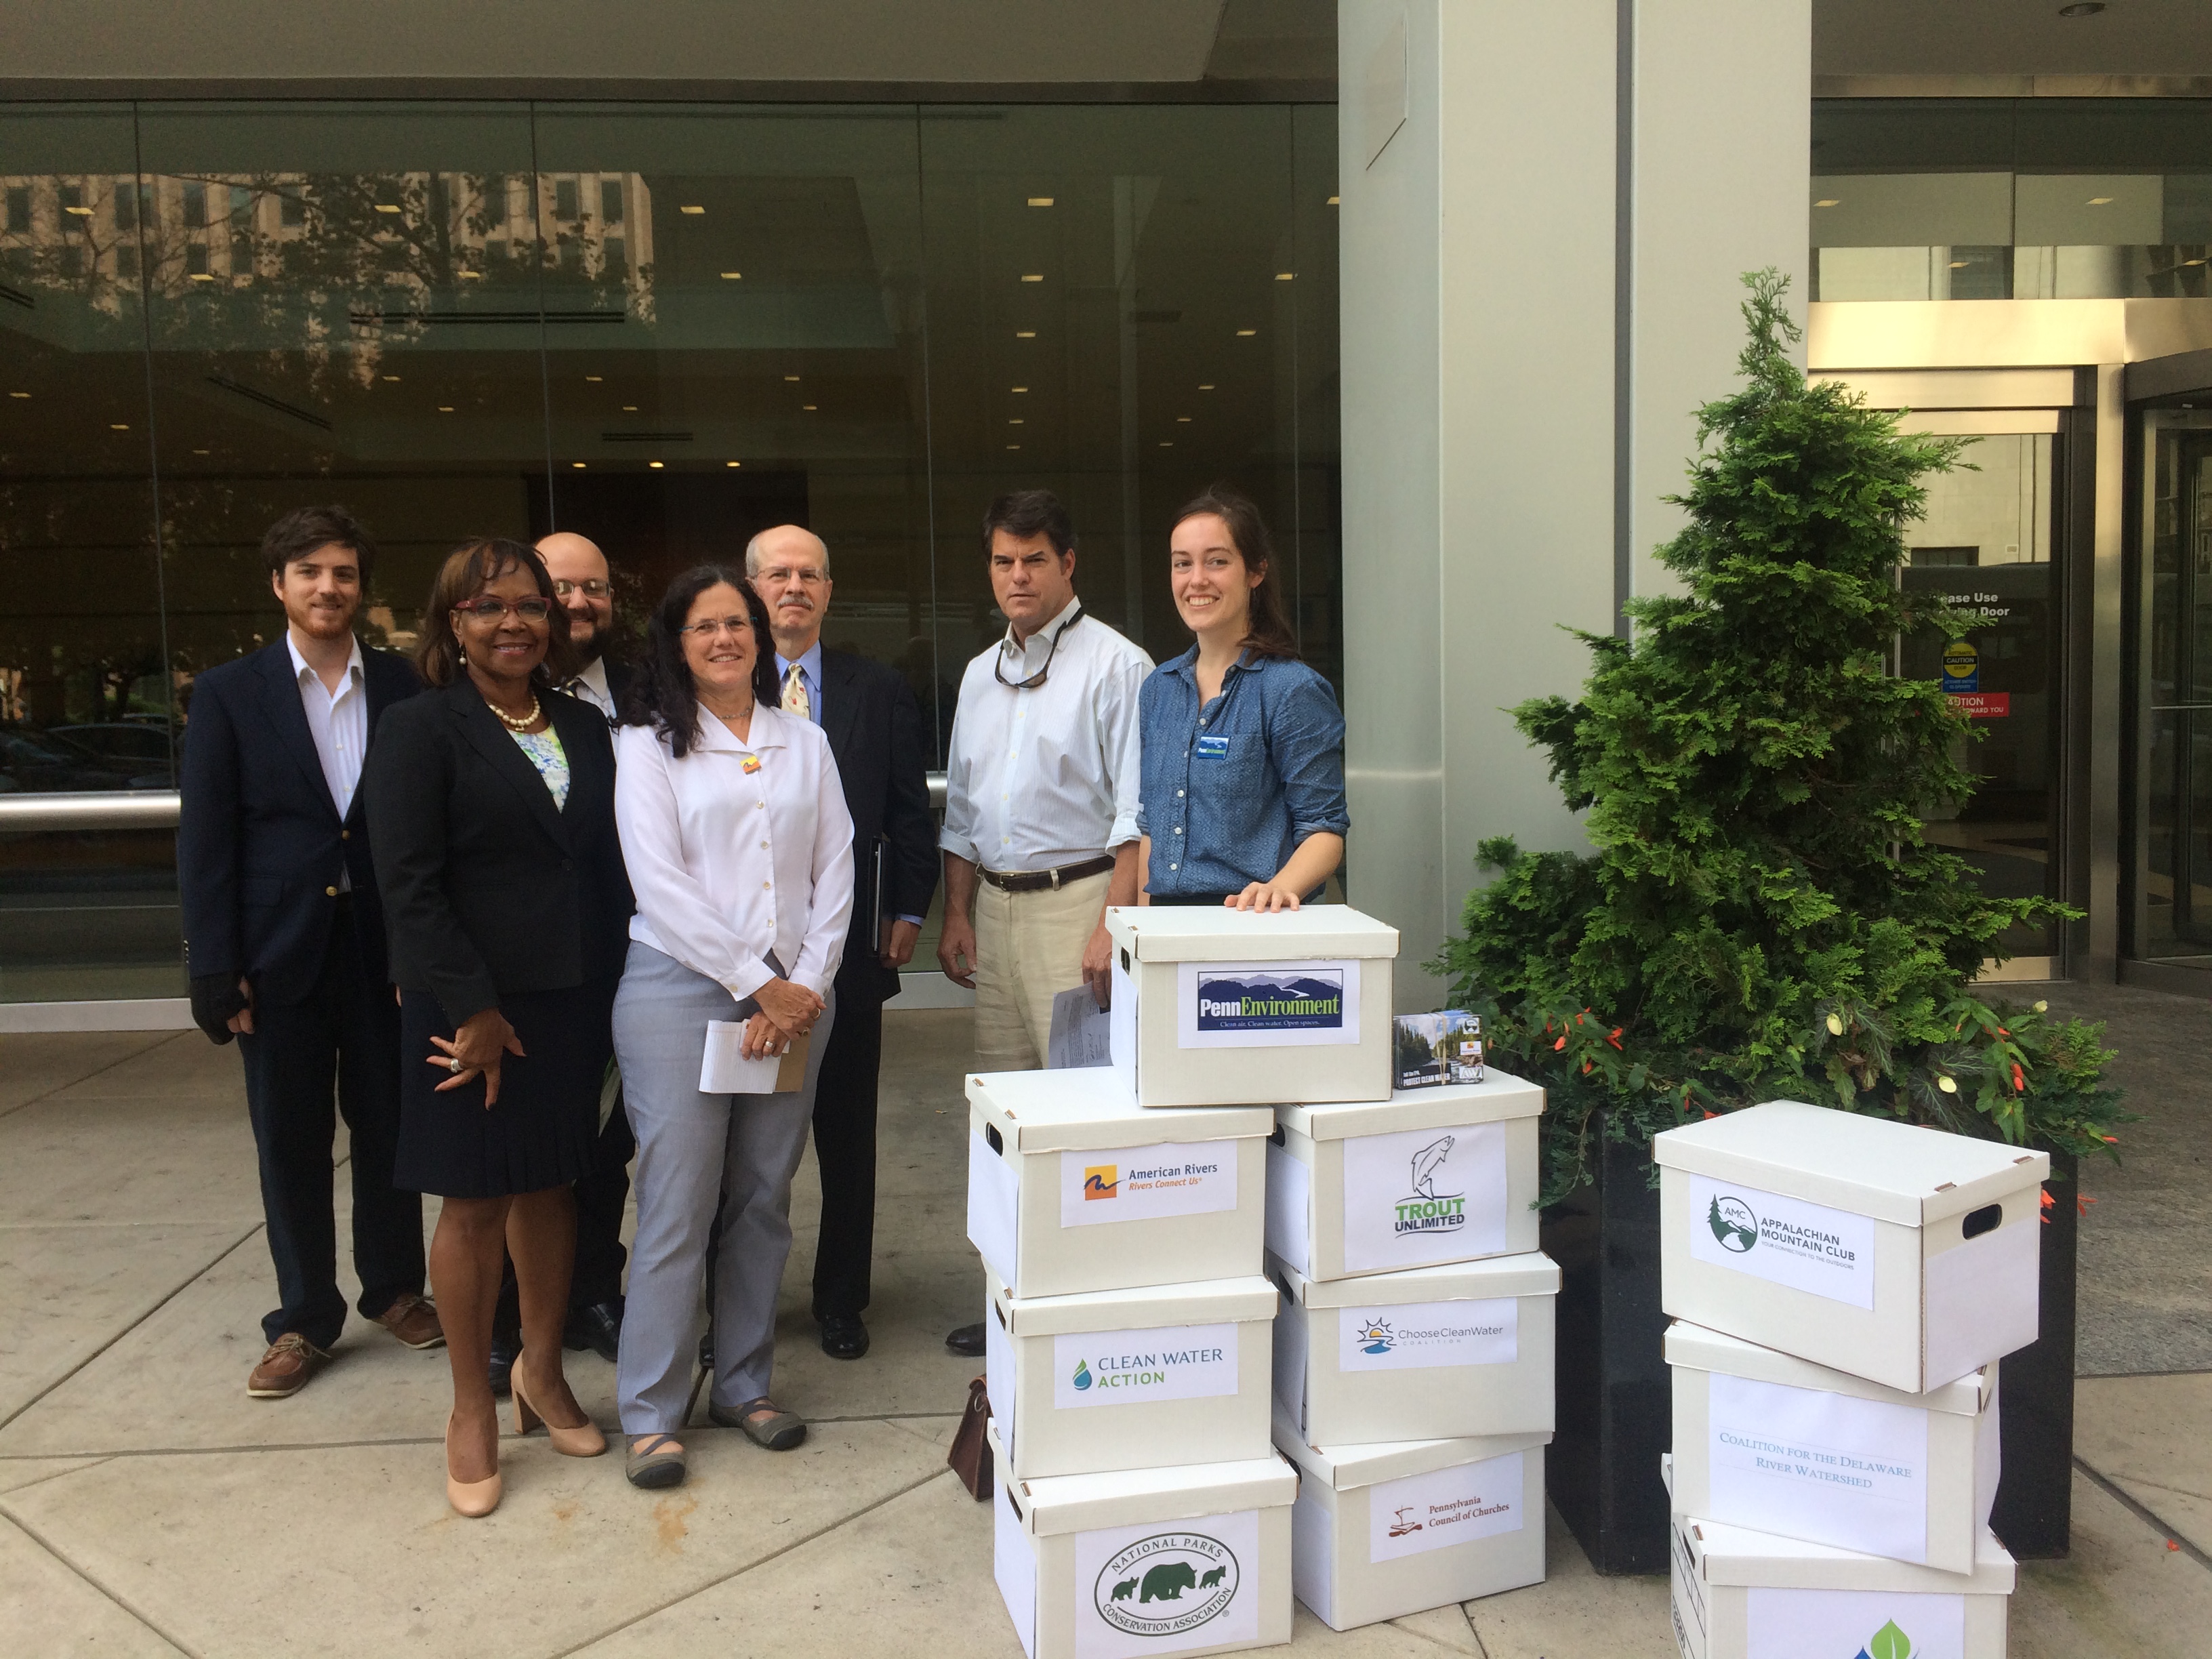 Environmental organizations symbolically delivered 20,000 public comments to EPA in support of the clean water rule.